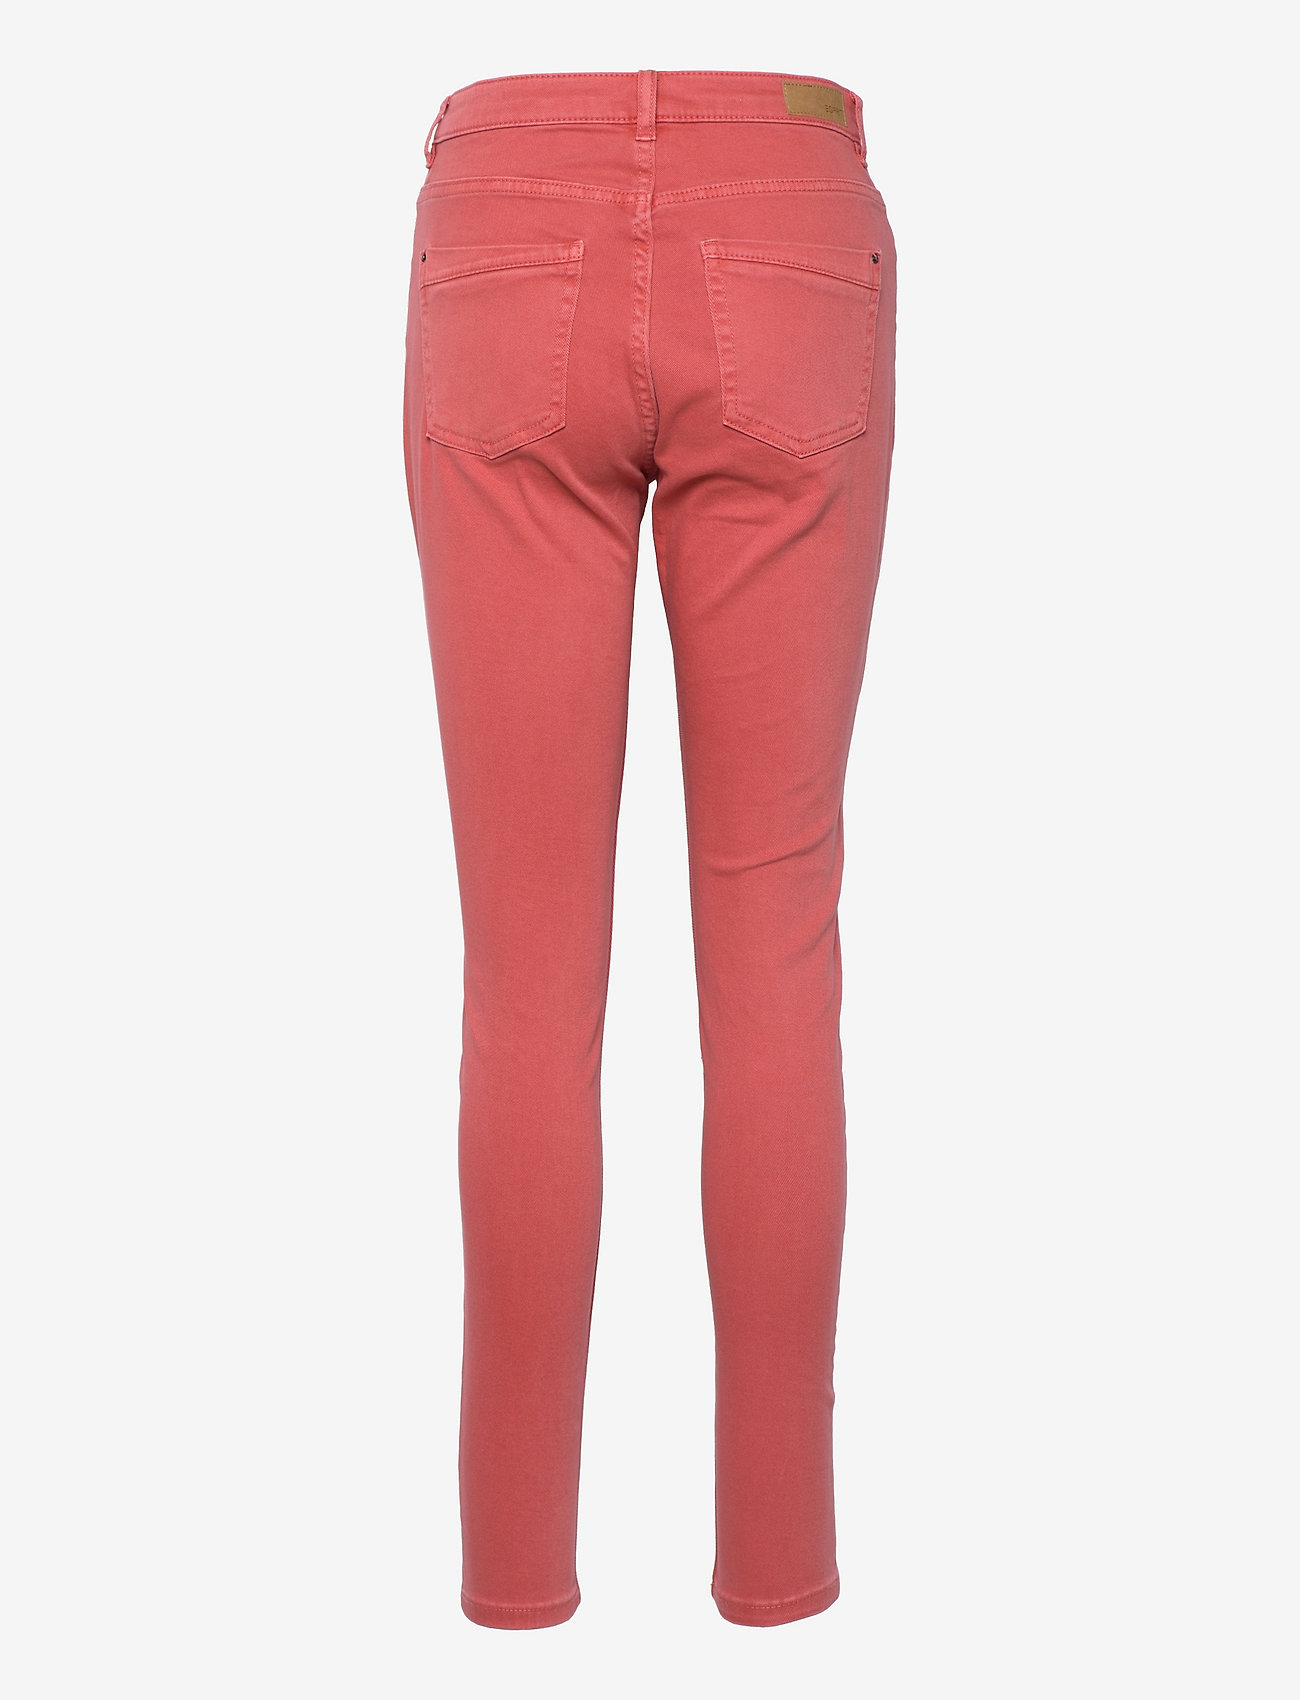 Esprit Casual - Stretch trousers with zip detail - slim fit jeans - coral - 1